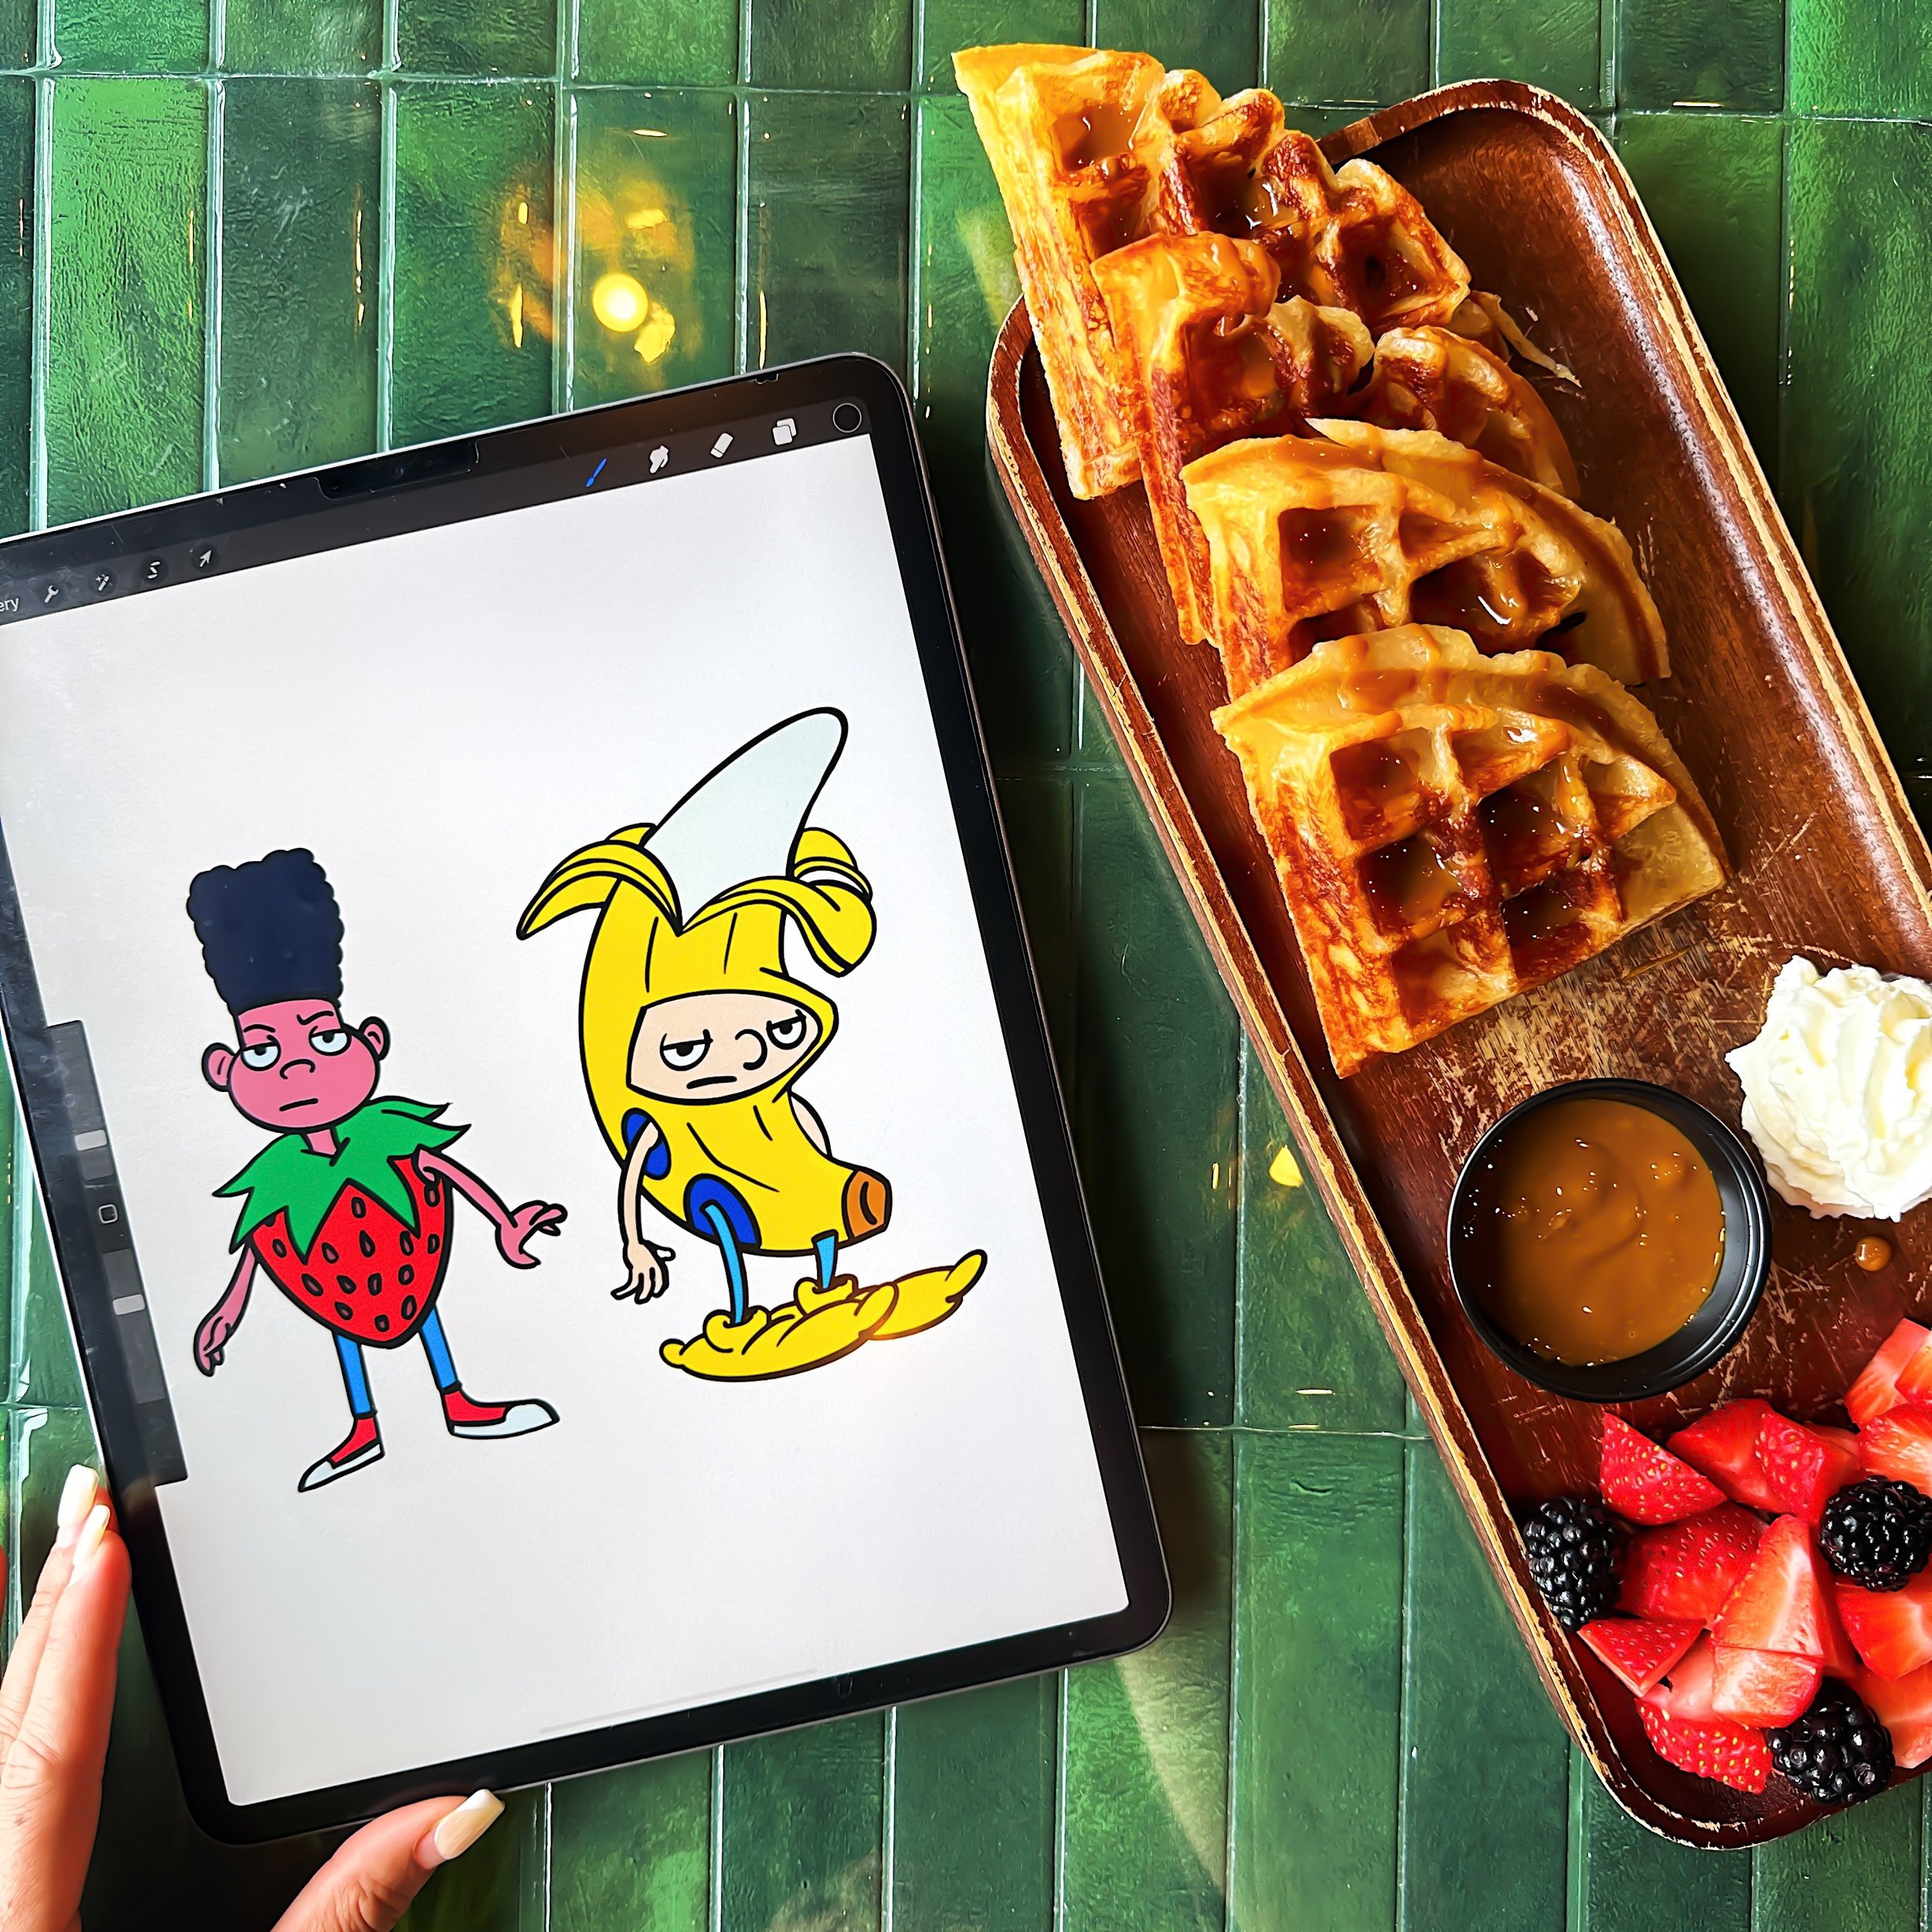 Saturday morning cartoons ✏️ ft. our drool worthy Waffle Bono! 🤤 What was your go to cartoon show growing up? Comment down below 👇 ⁣
⁣⁣
⁣⁣
⁣⁣
⁣⁣
⁣⁣
 ⁣⁣
⁣⁣
⁣⁣
⁣⁣
#marimbacafe #shoplocal #shopsmall #njevents #hackensacknj #latinowriters #latinoowned 